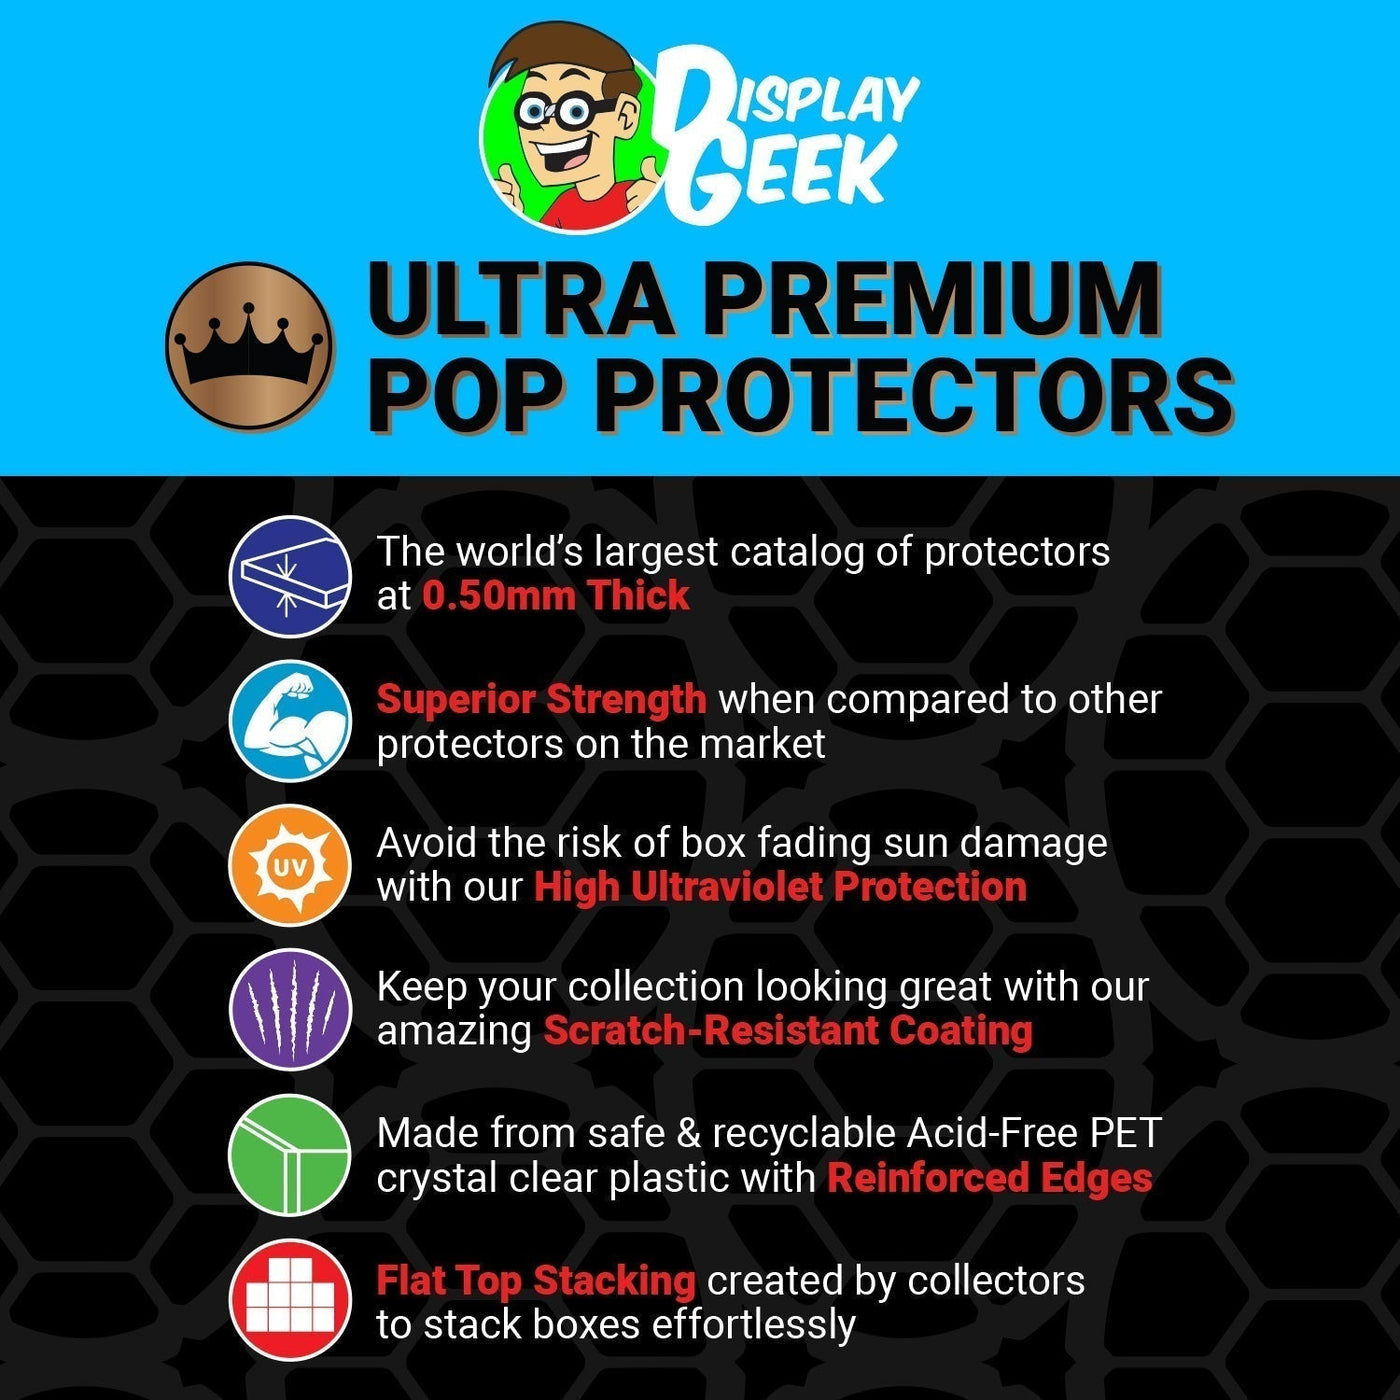 Pop Protector for 3 Pack The Hex Girls Funko Pop on The Protector Guide App by Display Geek